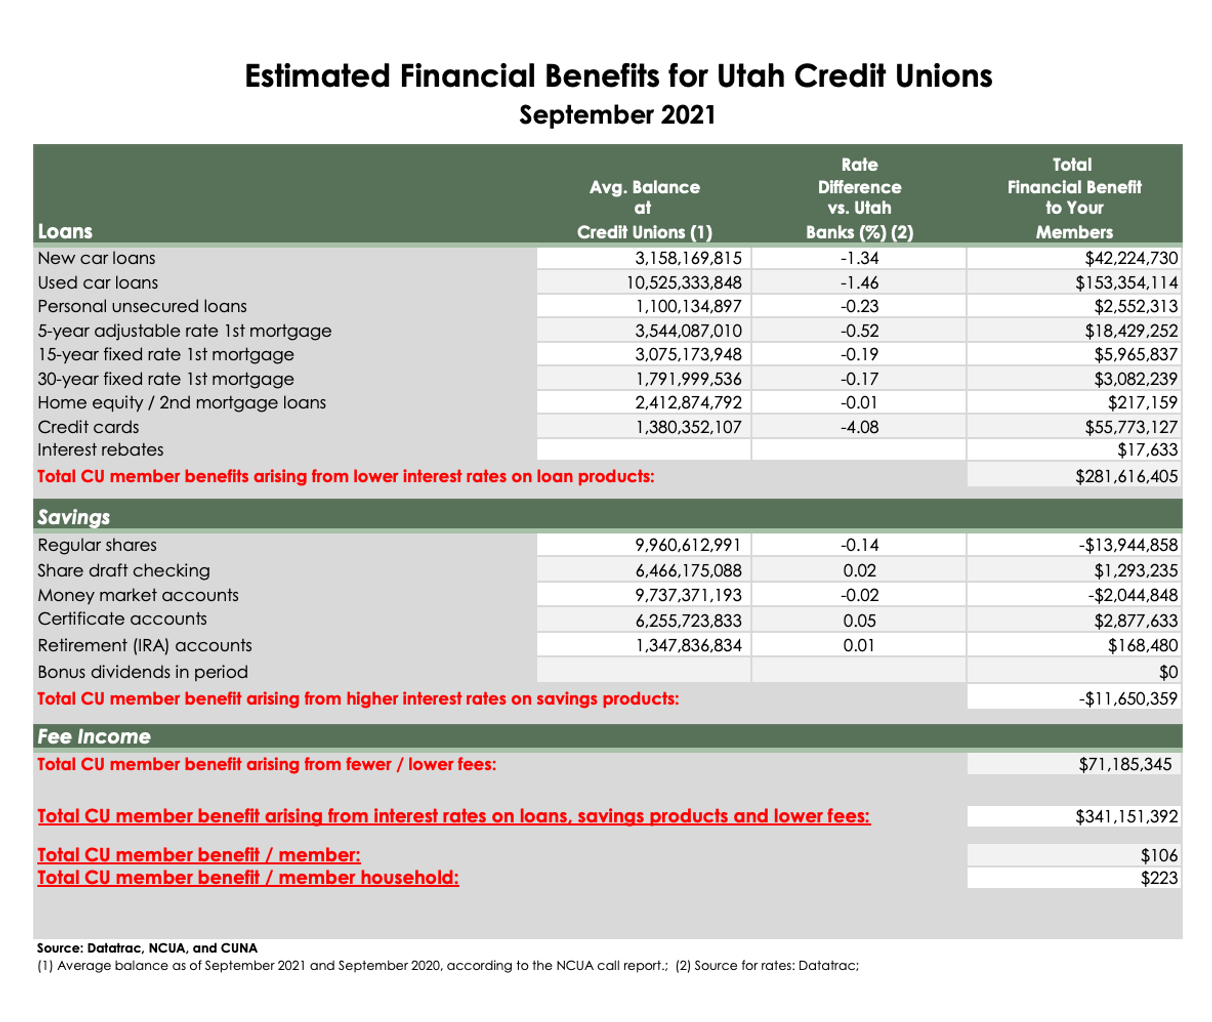 Table of data showing financial benefit of credit unions